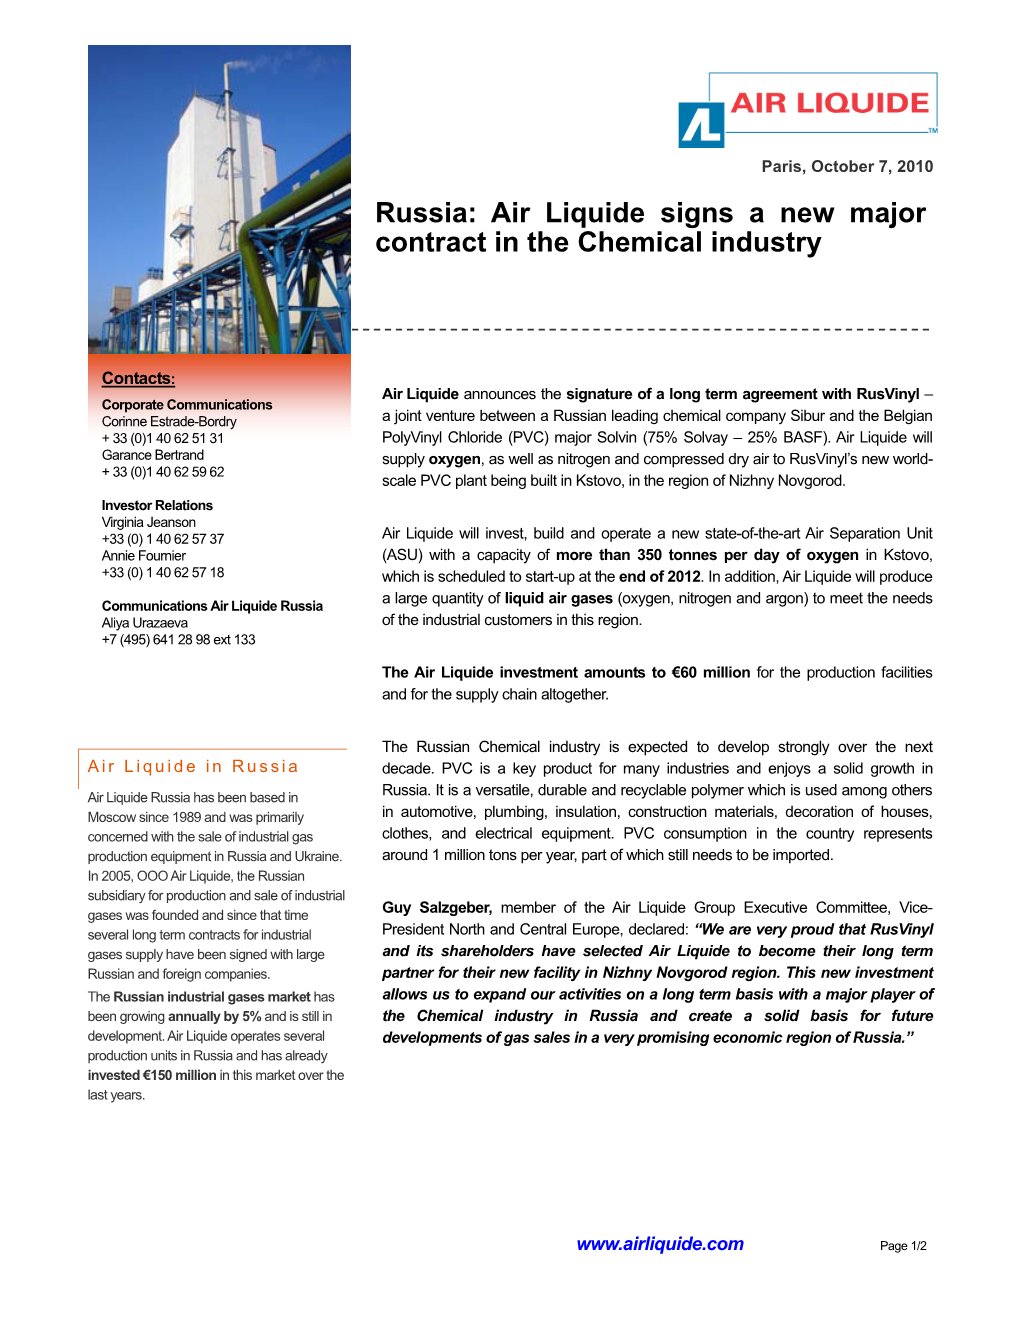 Russia: Air Liquide Signs a New Major Contract in the Chemical Industry